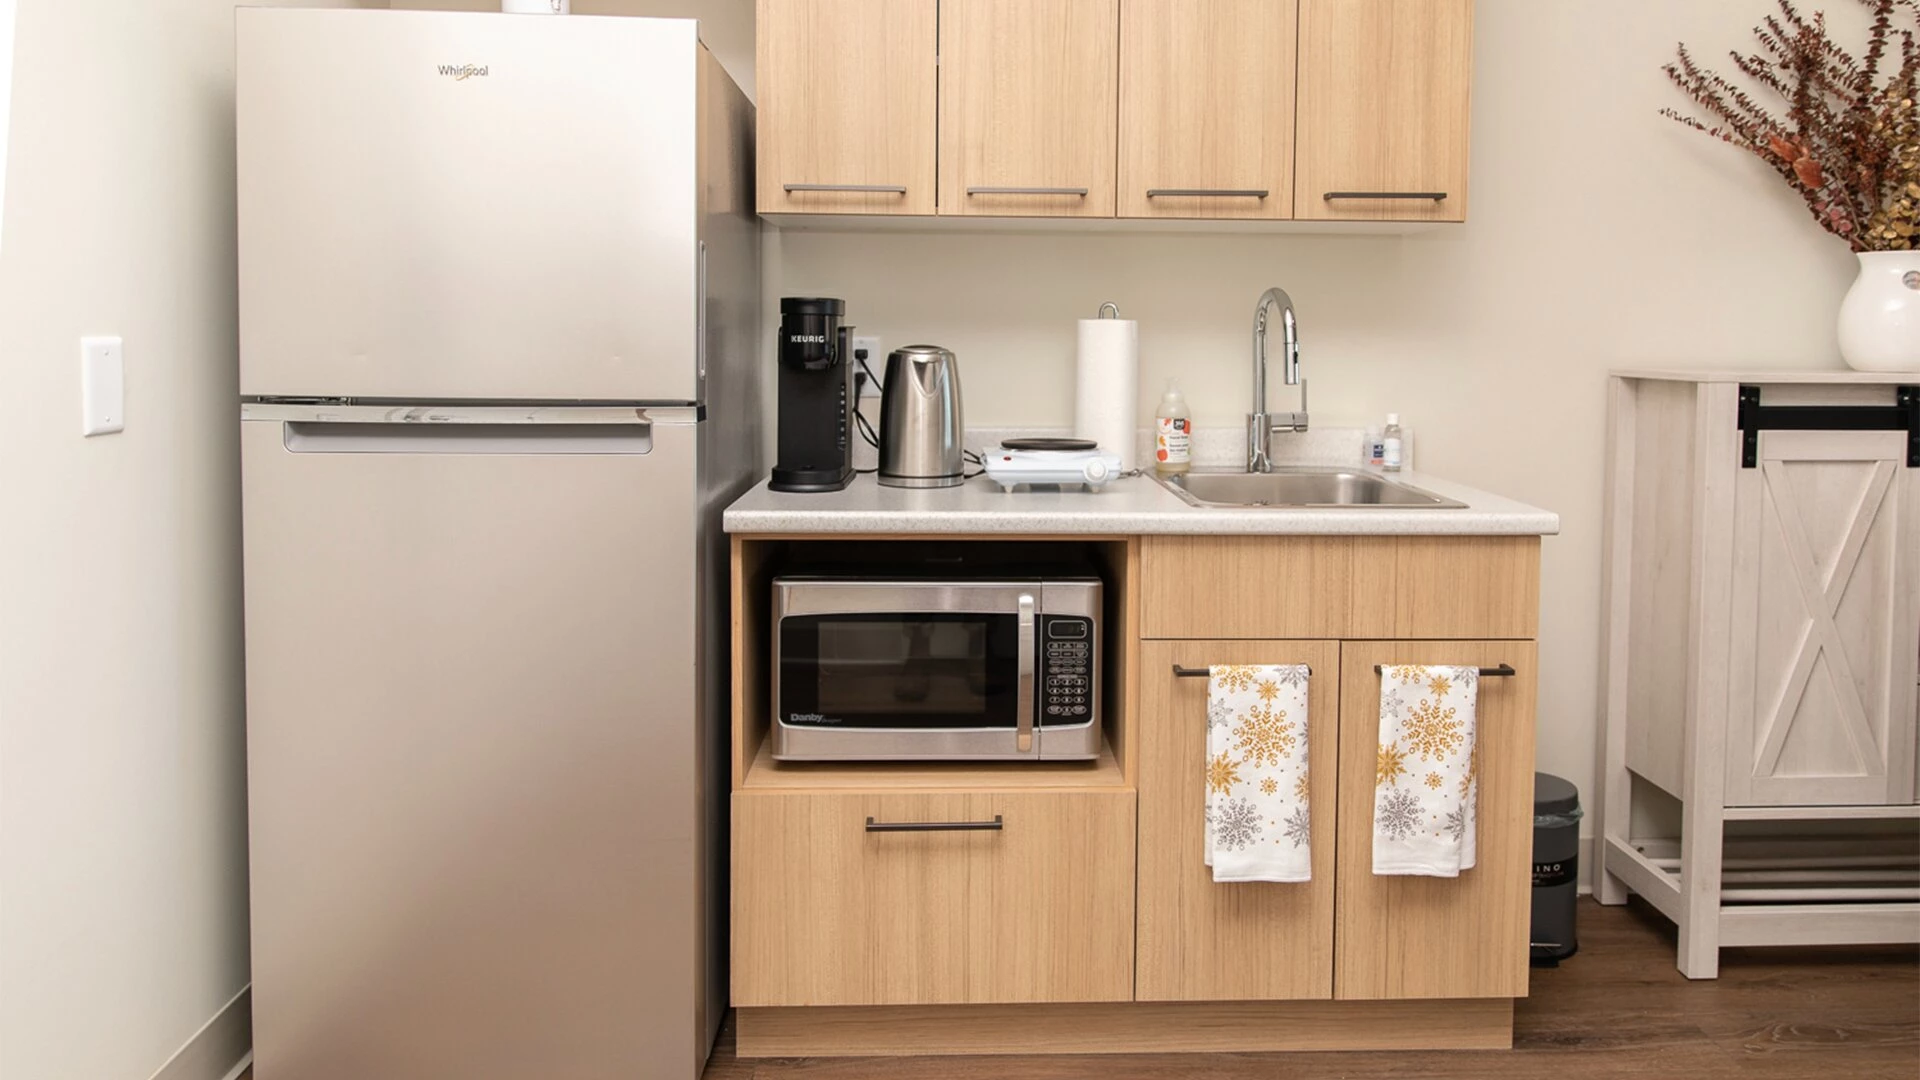 The view of a kitchenette in a Wisteria Place senior apartment